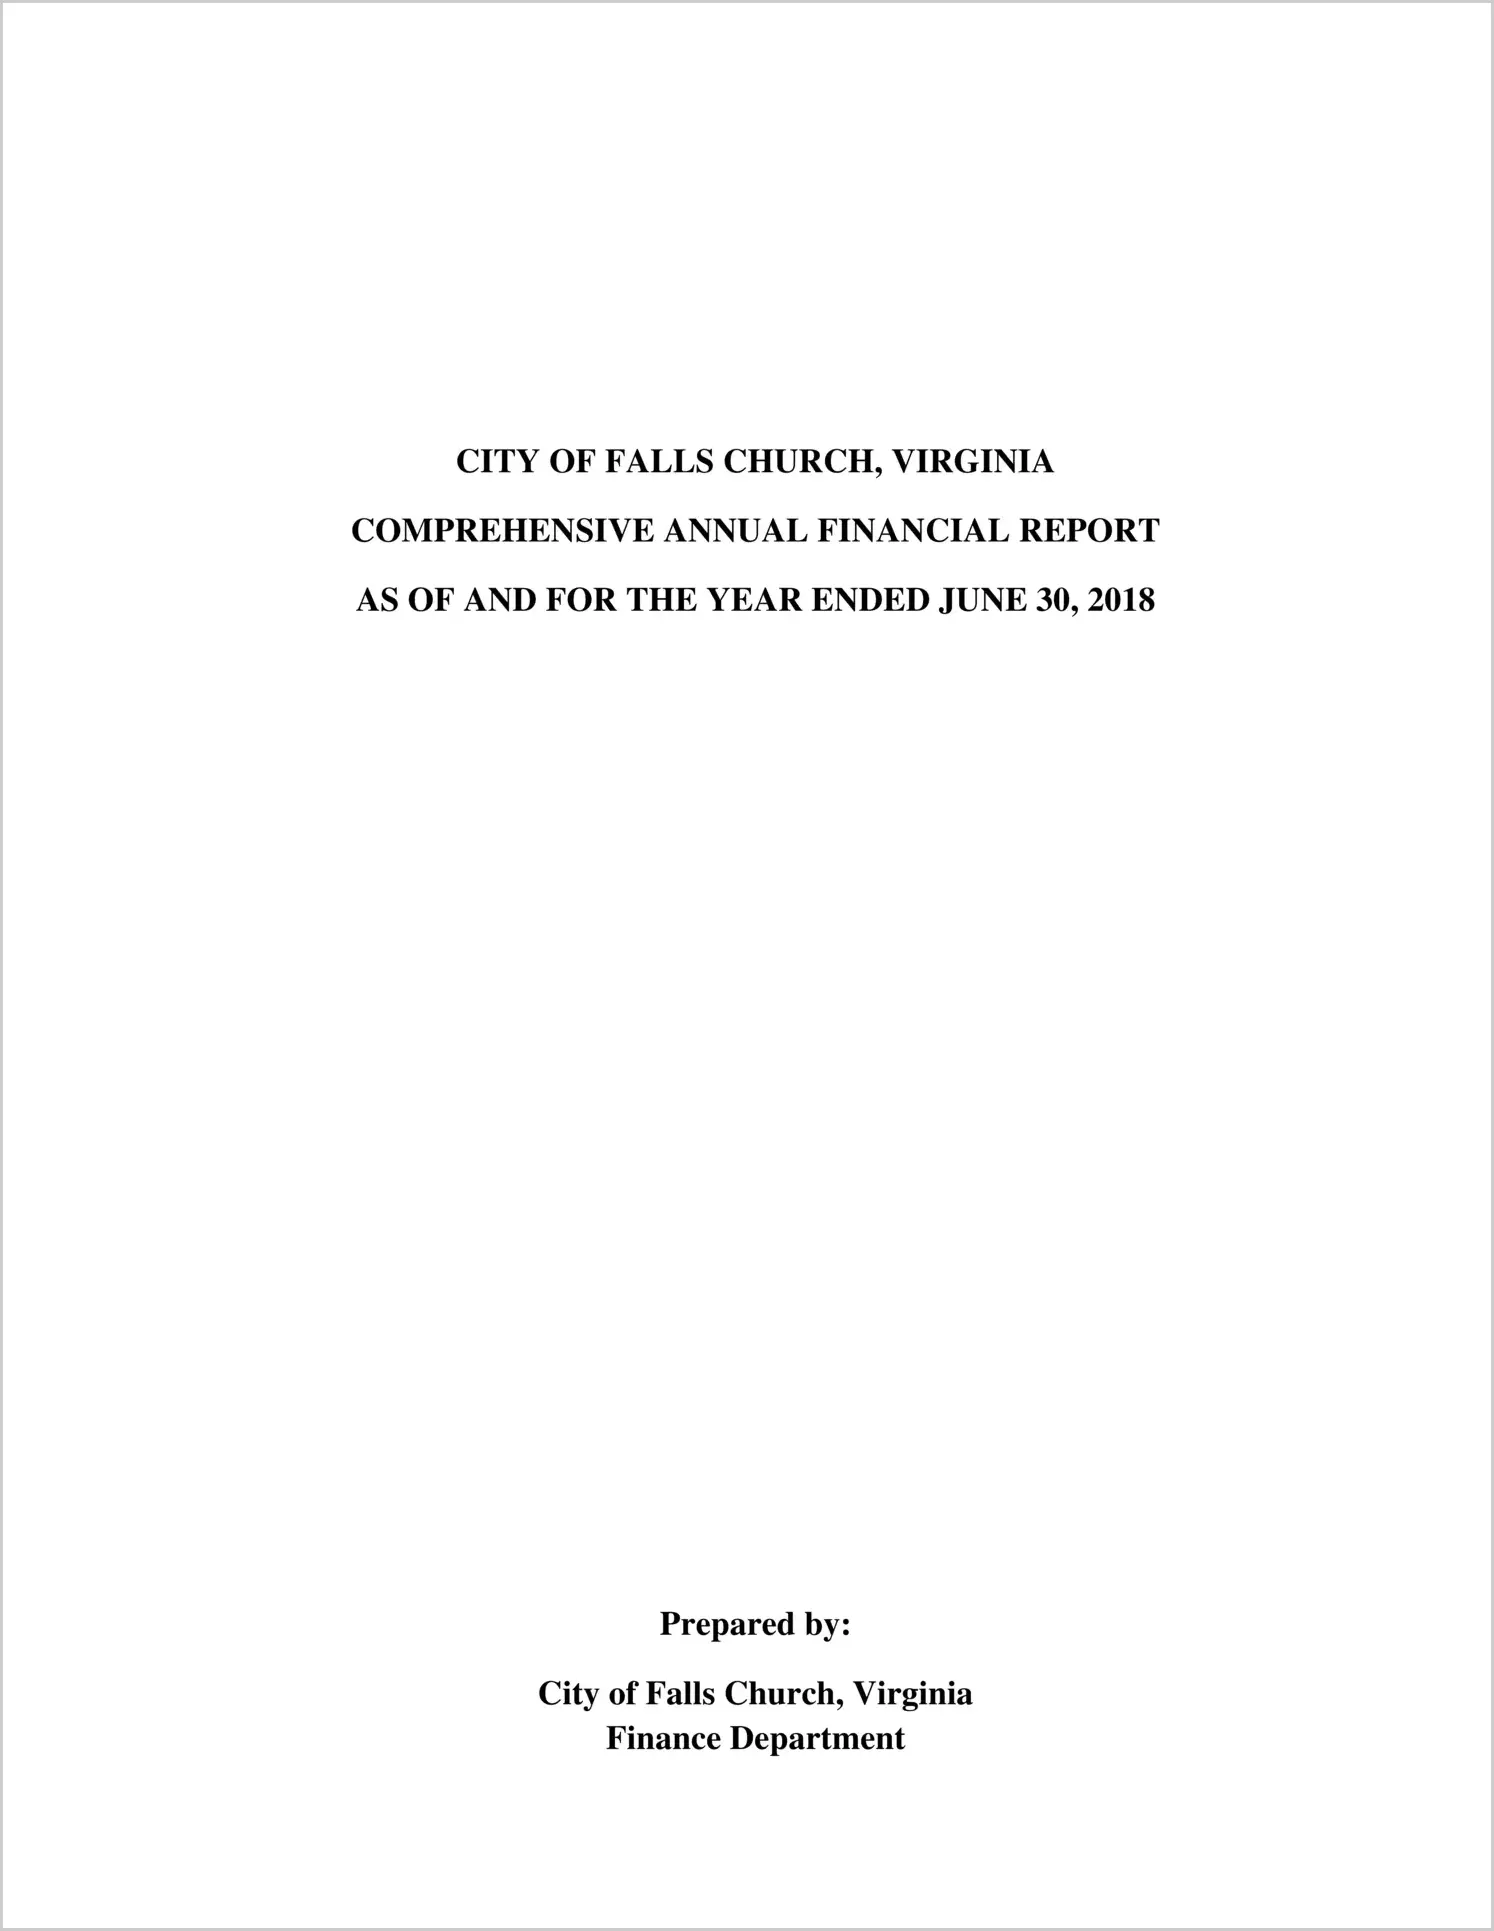 2018 Annual Financial Report for City of Falls Church